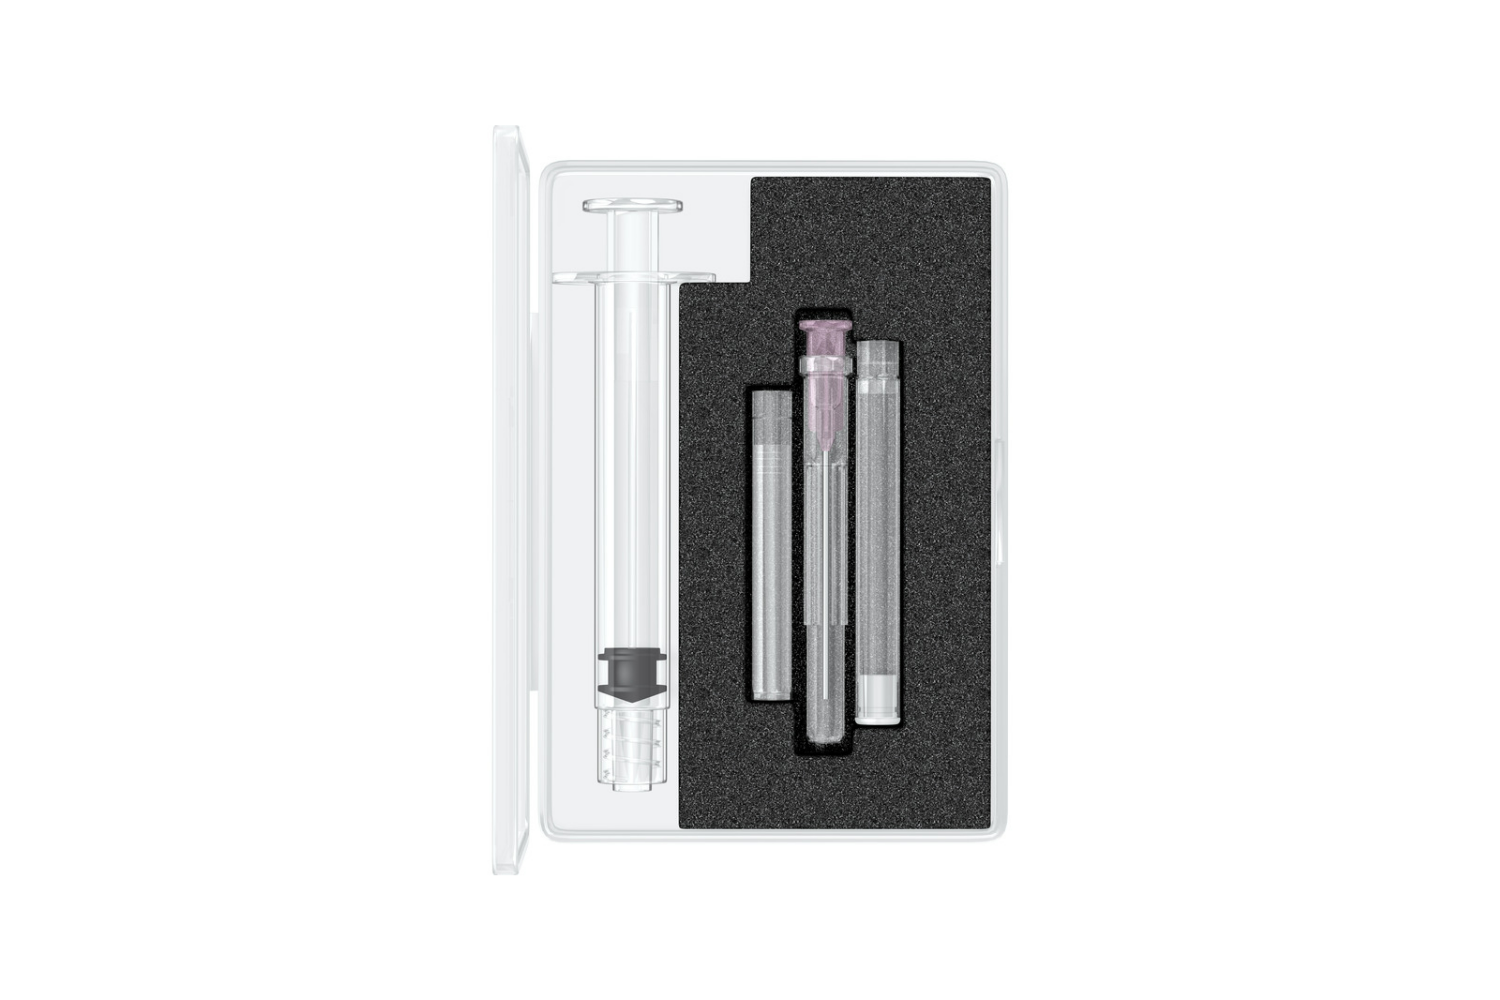 Sailor - Fountain pen cleaning and refill kit